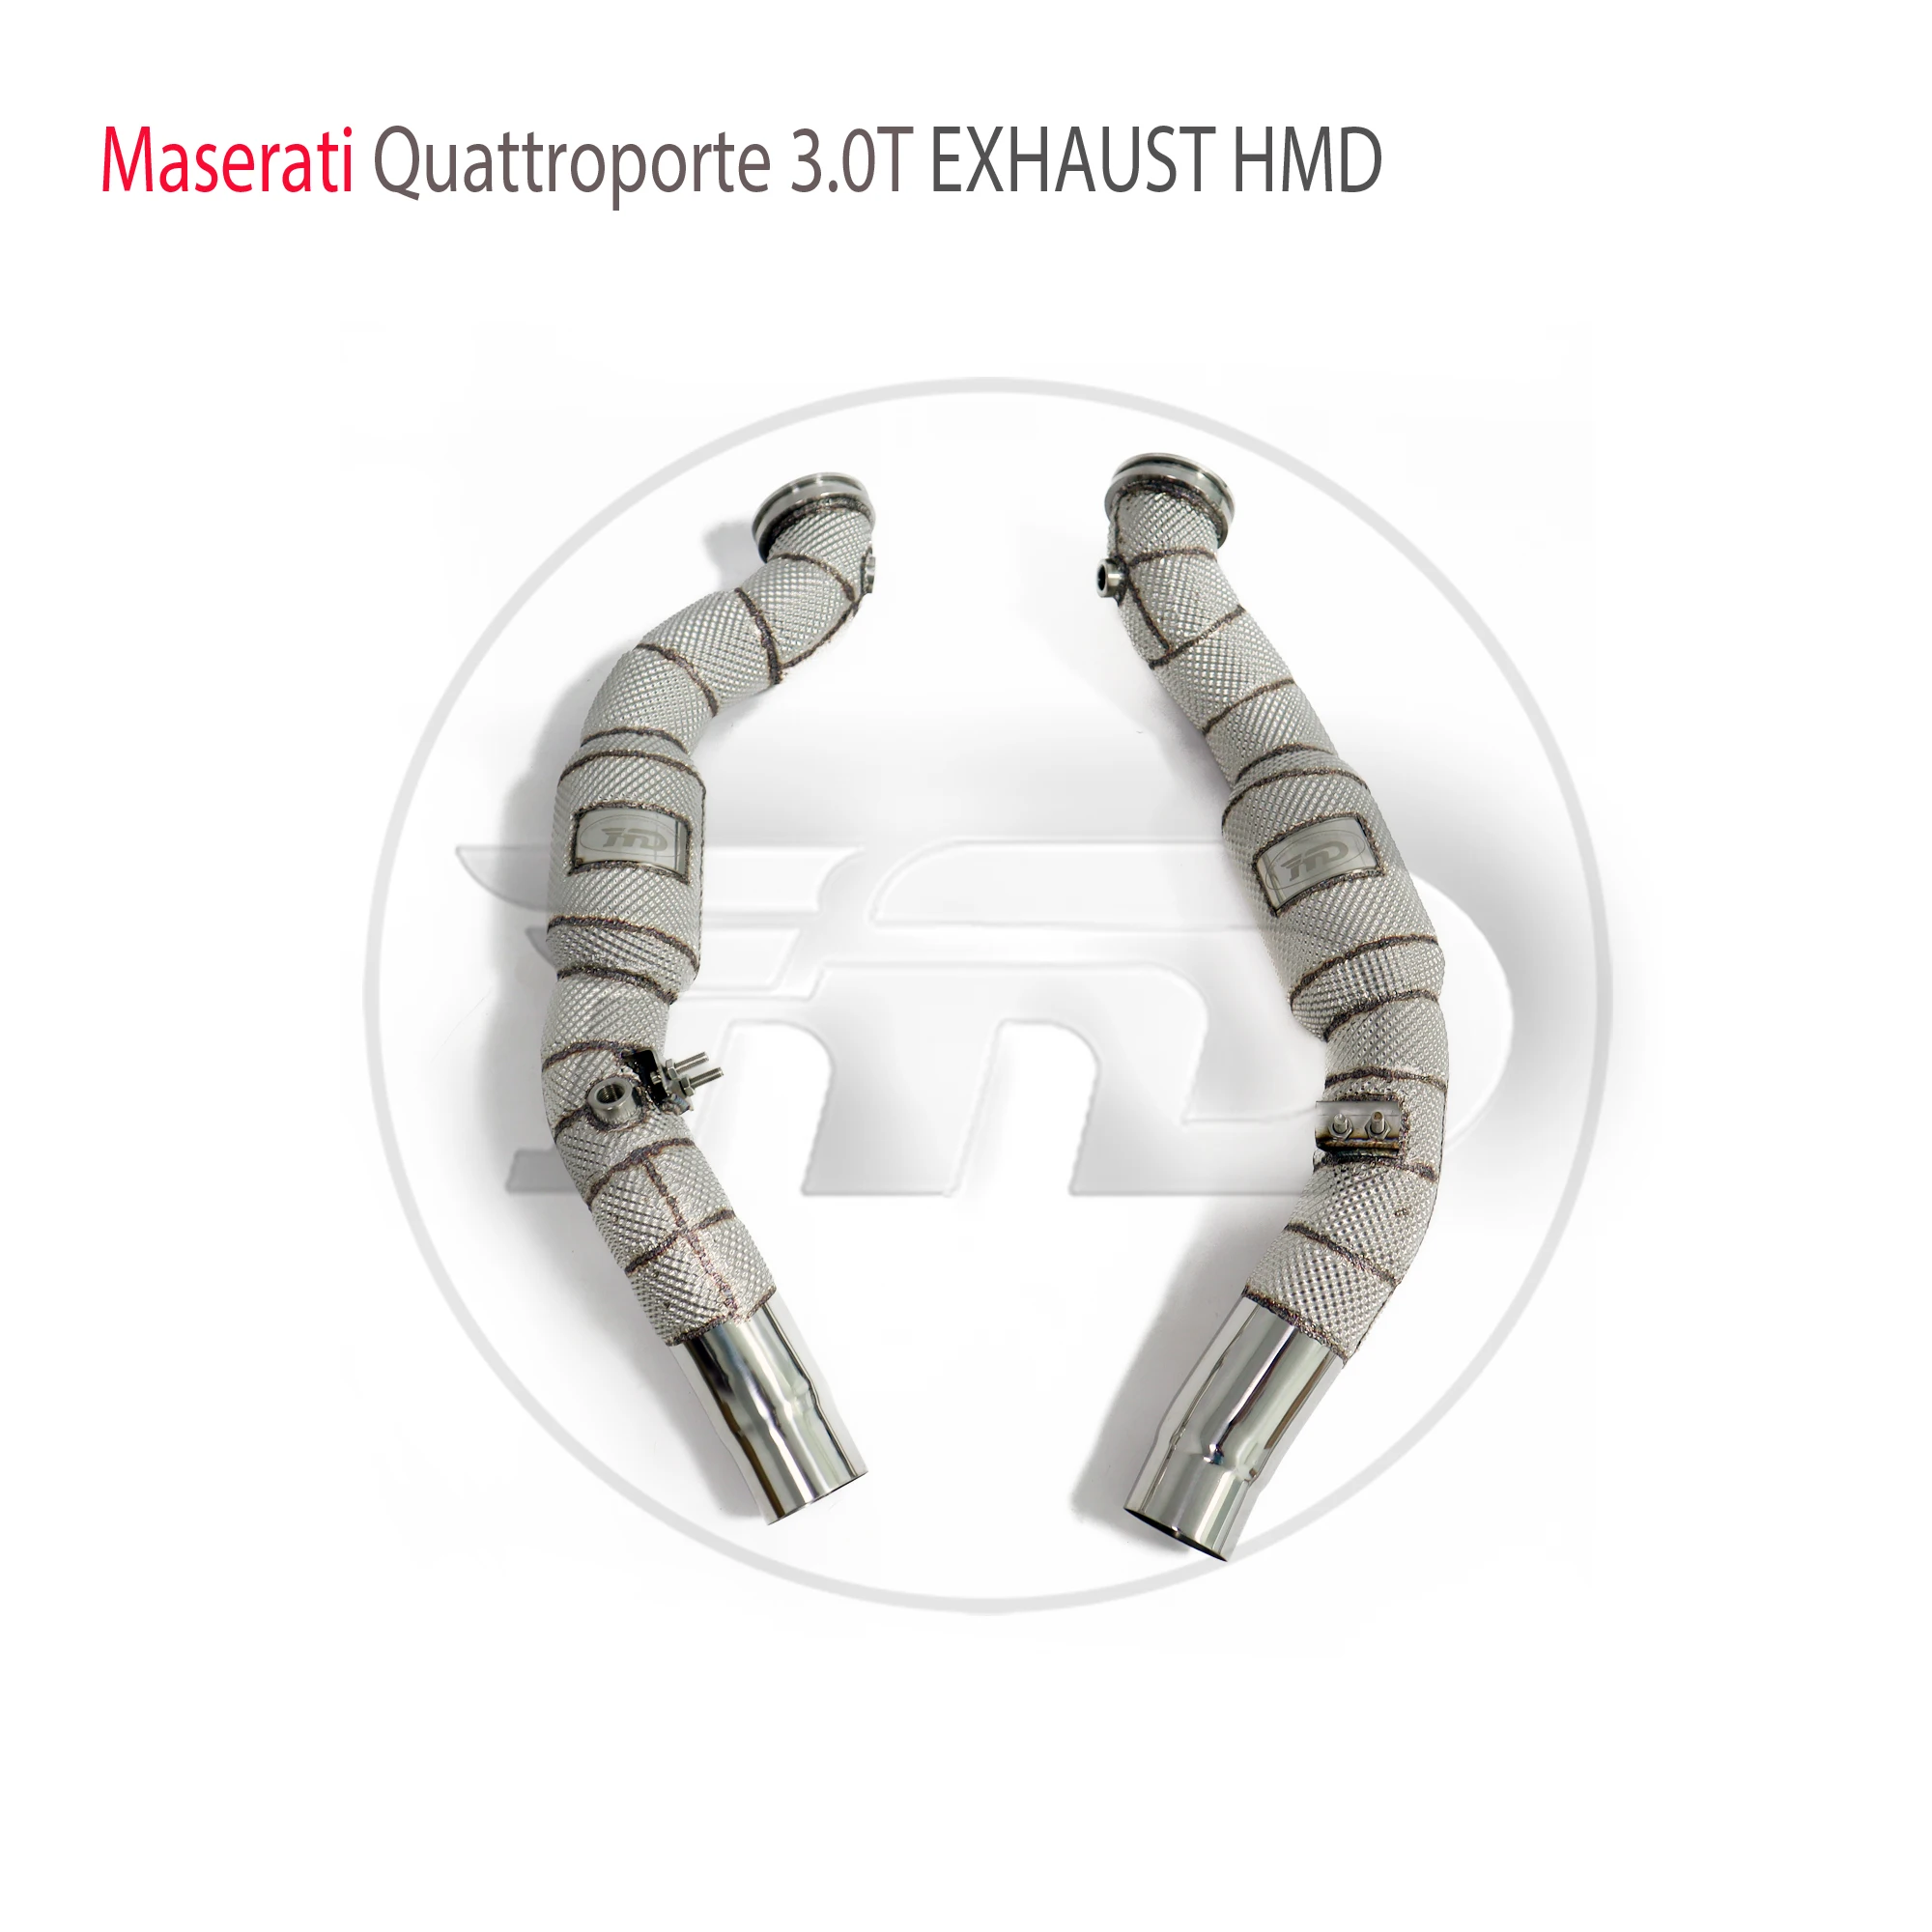 

HMD Exhaust System High Flow Performance Downpipe for Maserati Quattroporte 3.0T With Catalytic Converter Header